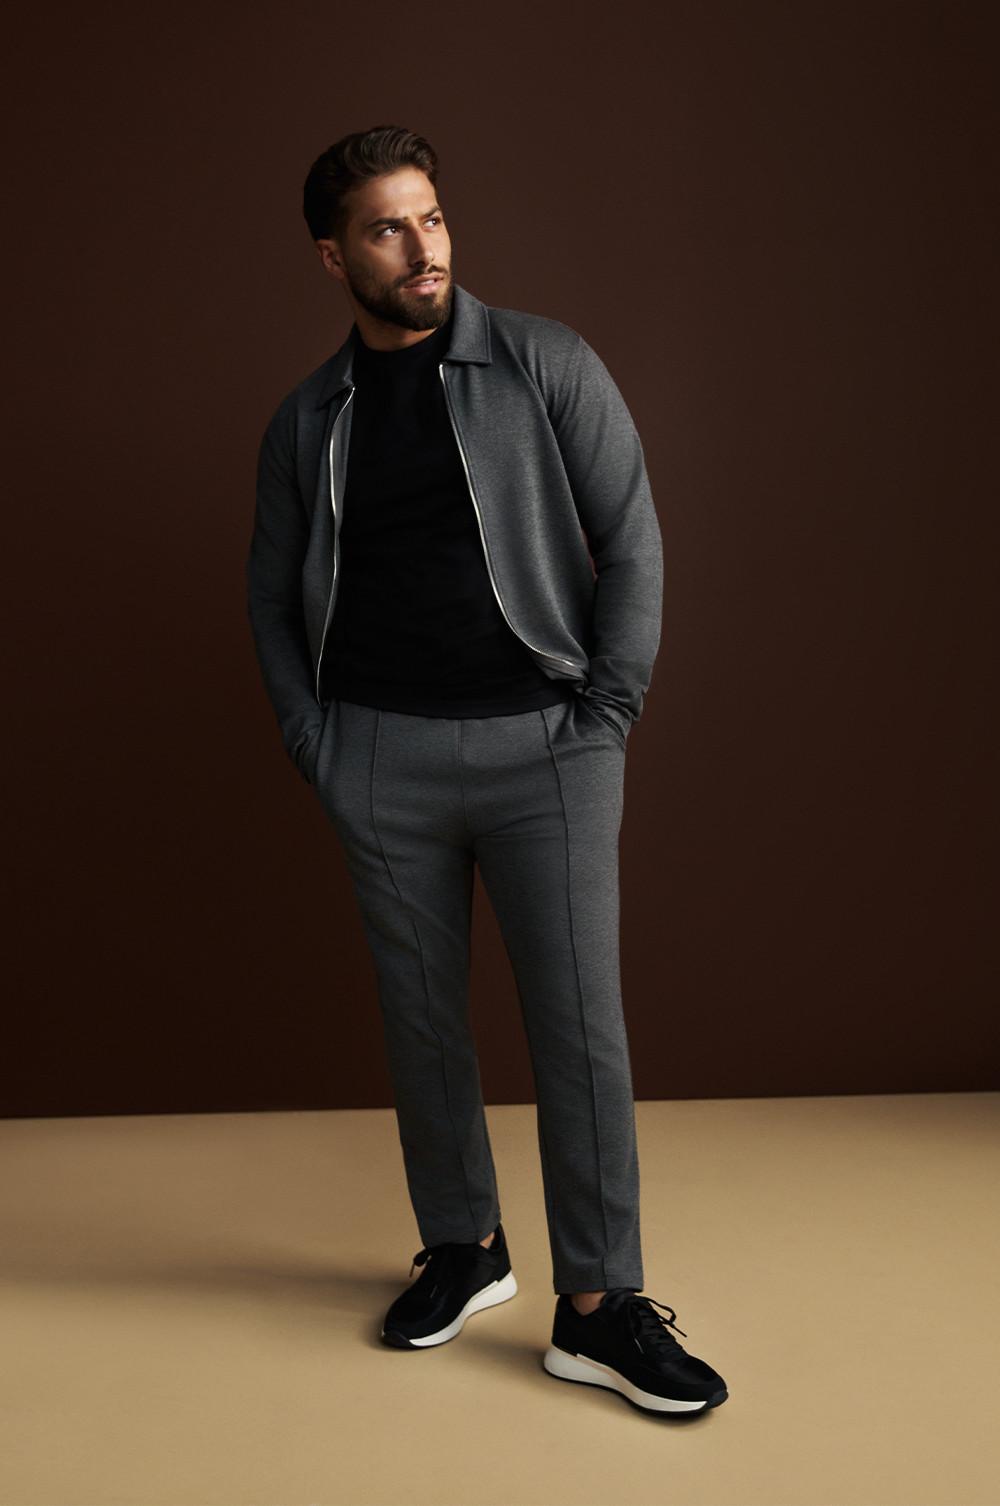 Collared jacket and tailored jogger